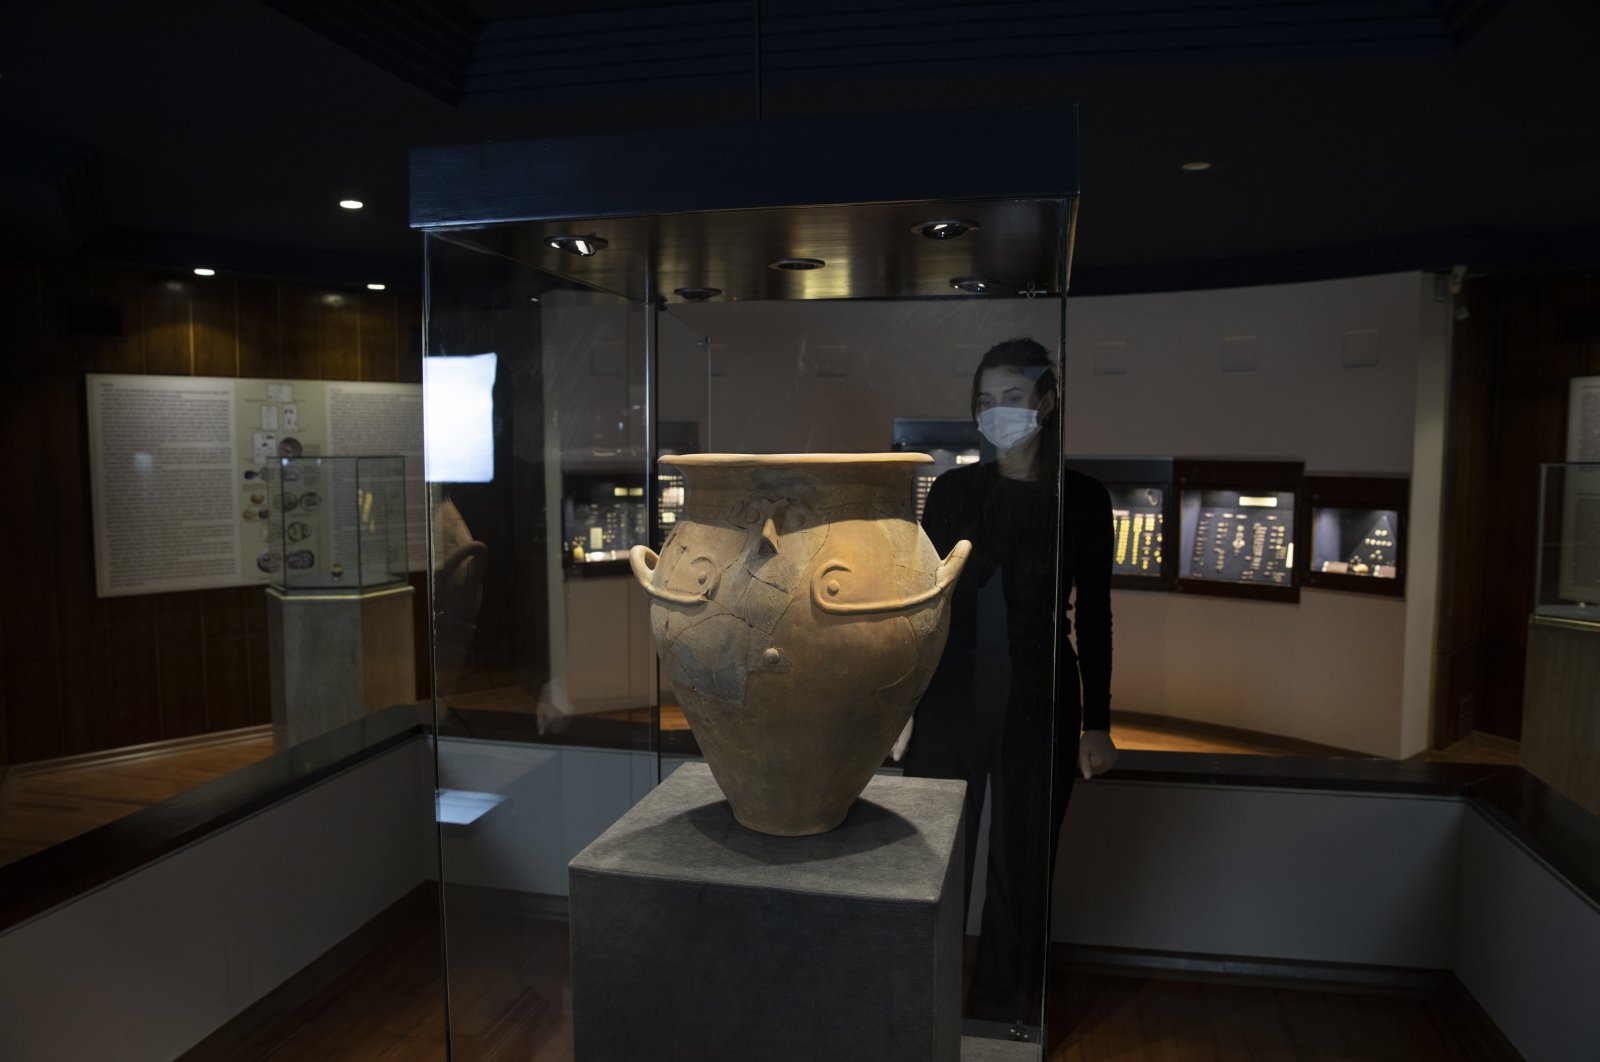 An item of pottery found in the Limantepe mound and featuring a depiction of a human face on display at Izmir Archaeology Museum, western Turkey, Feb. 8, 2022. (AA)